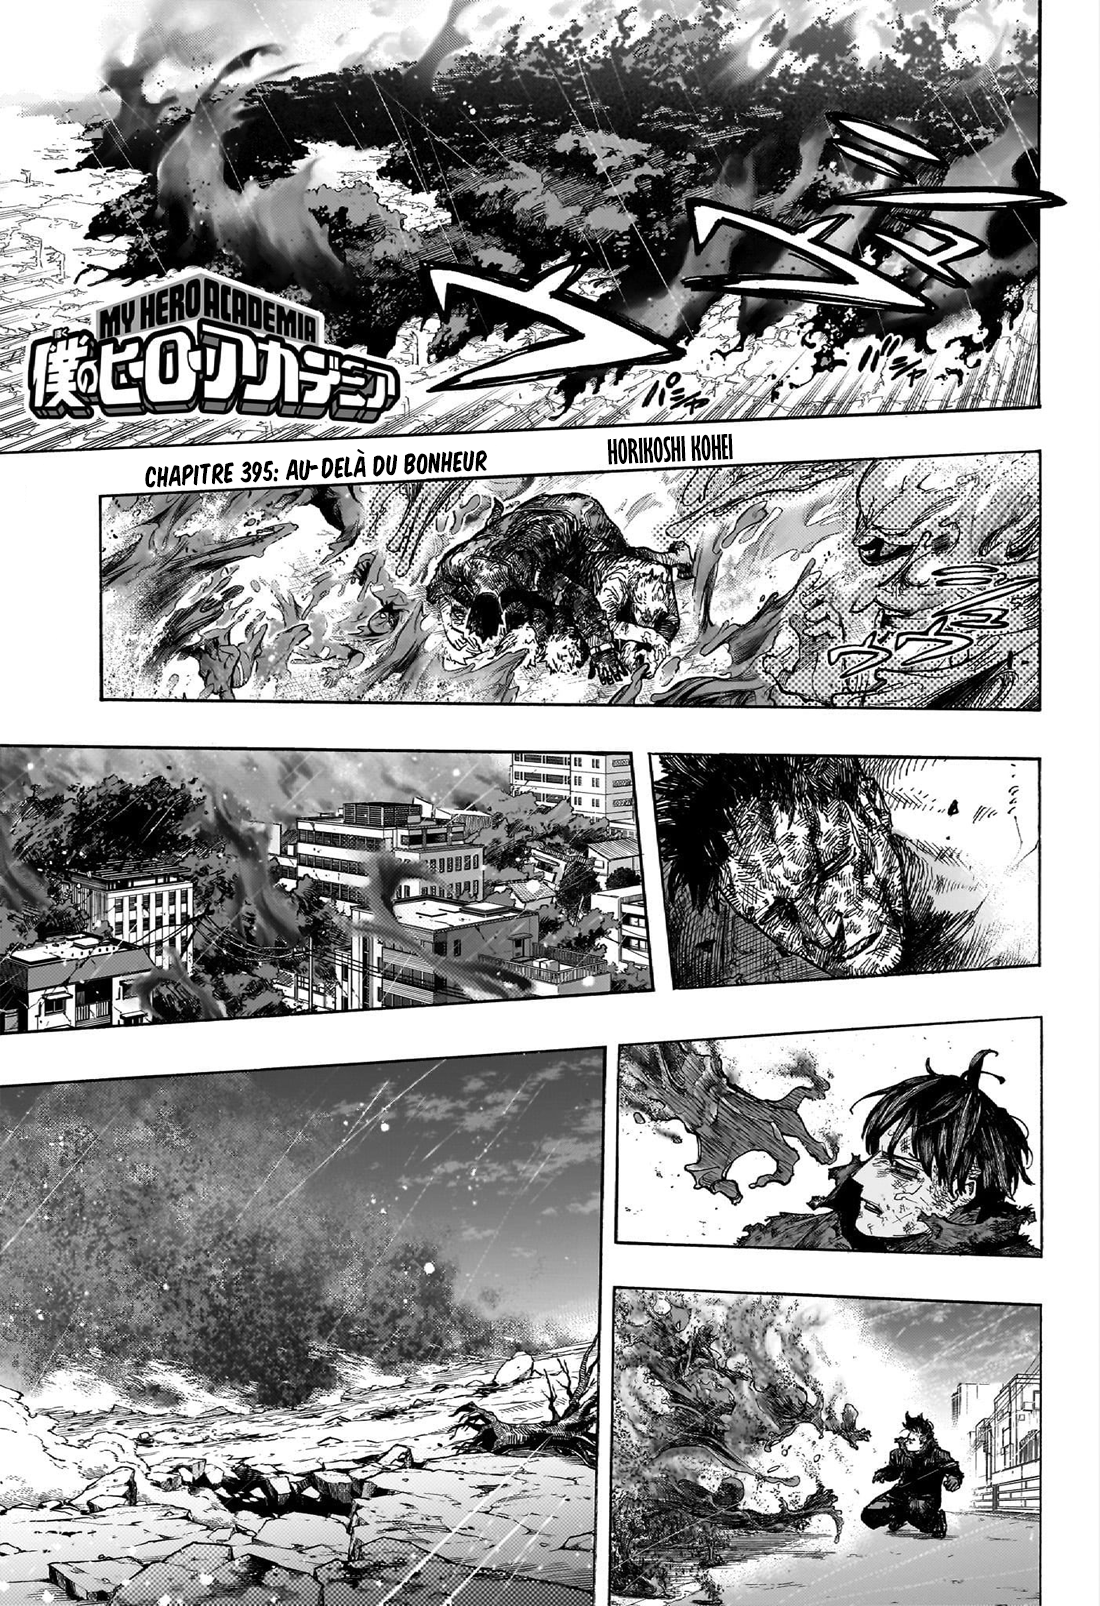 My Hero Academia: Chapter chapitre-395 - Page 1